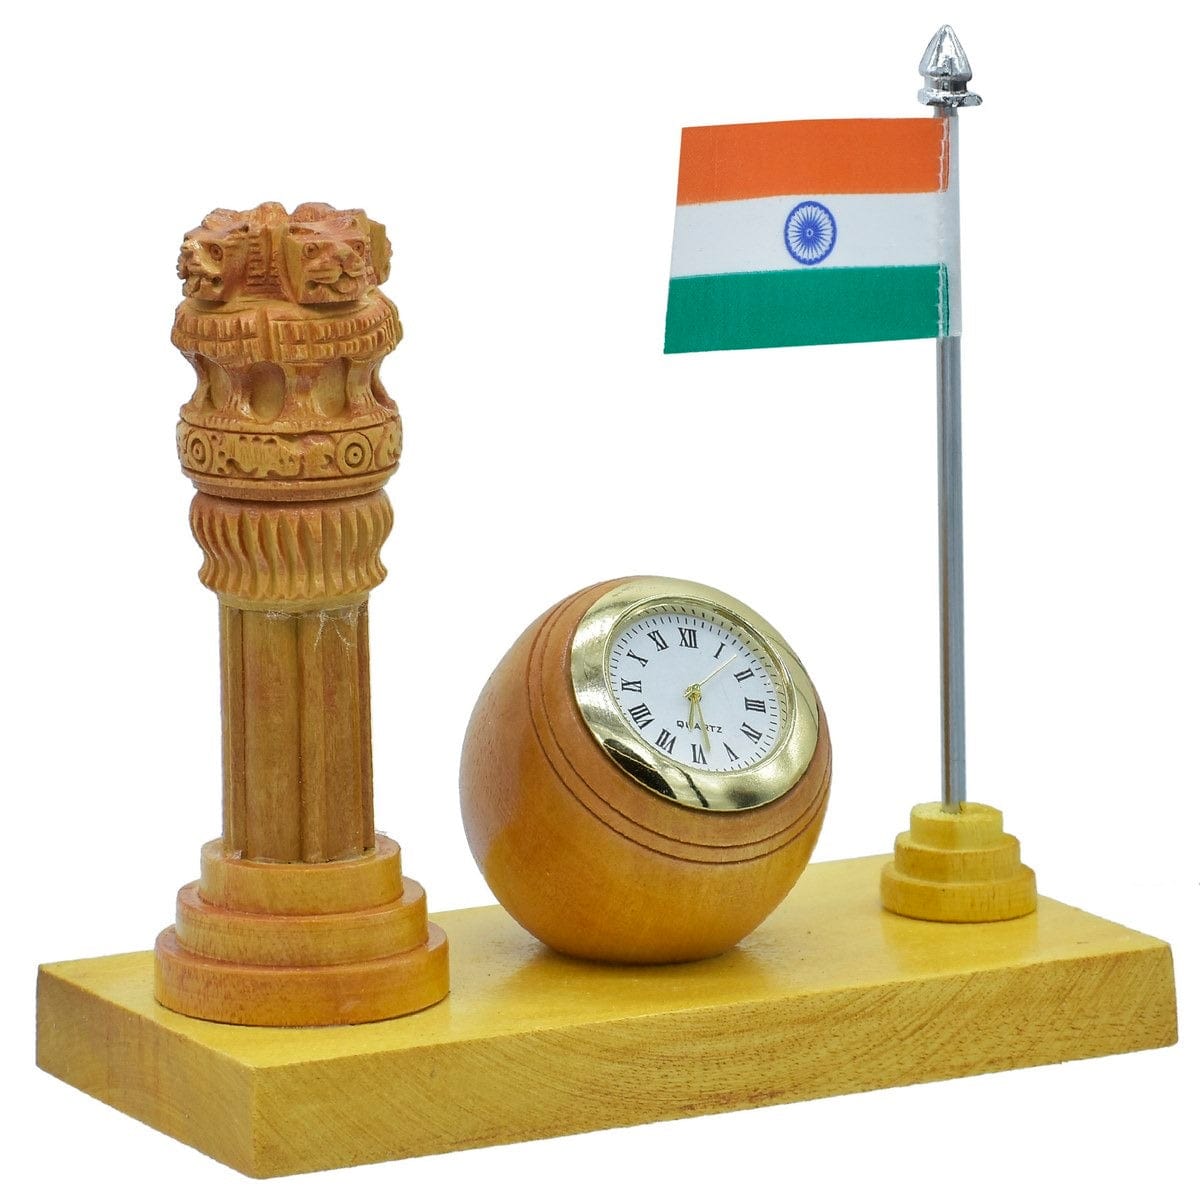 jags-mumbai Office Desk Stationery Wooden Table Top Stand With Watch Ashokchakra WTTP02